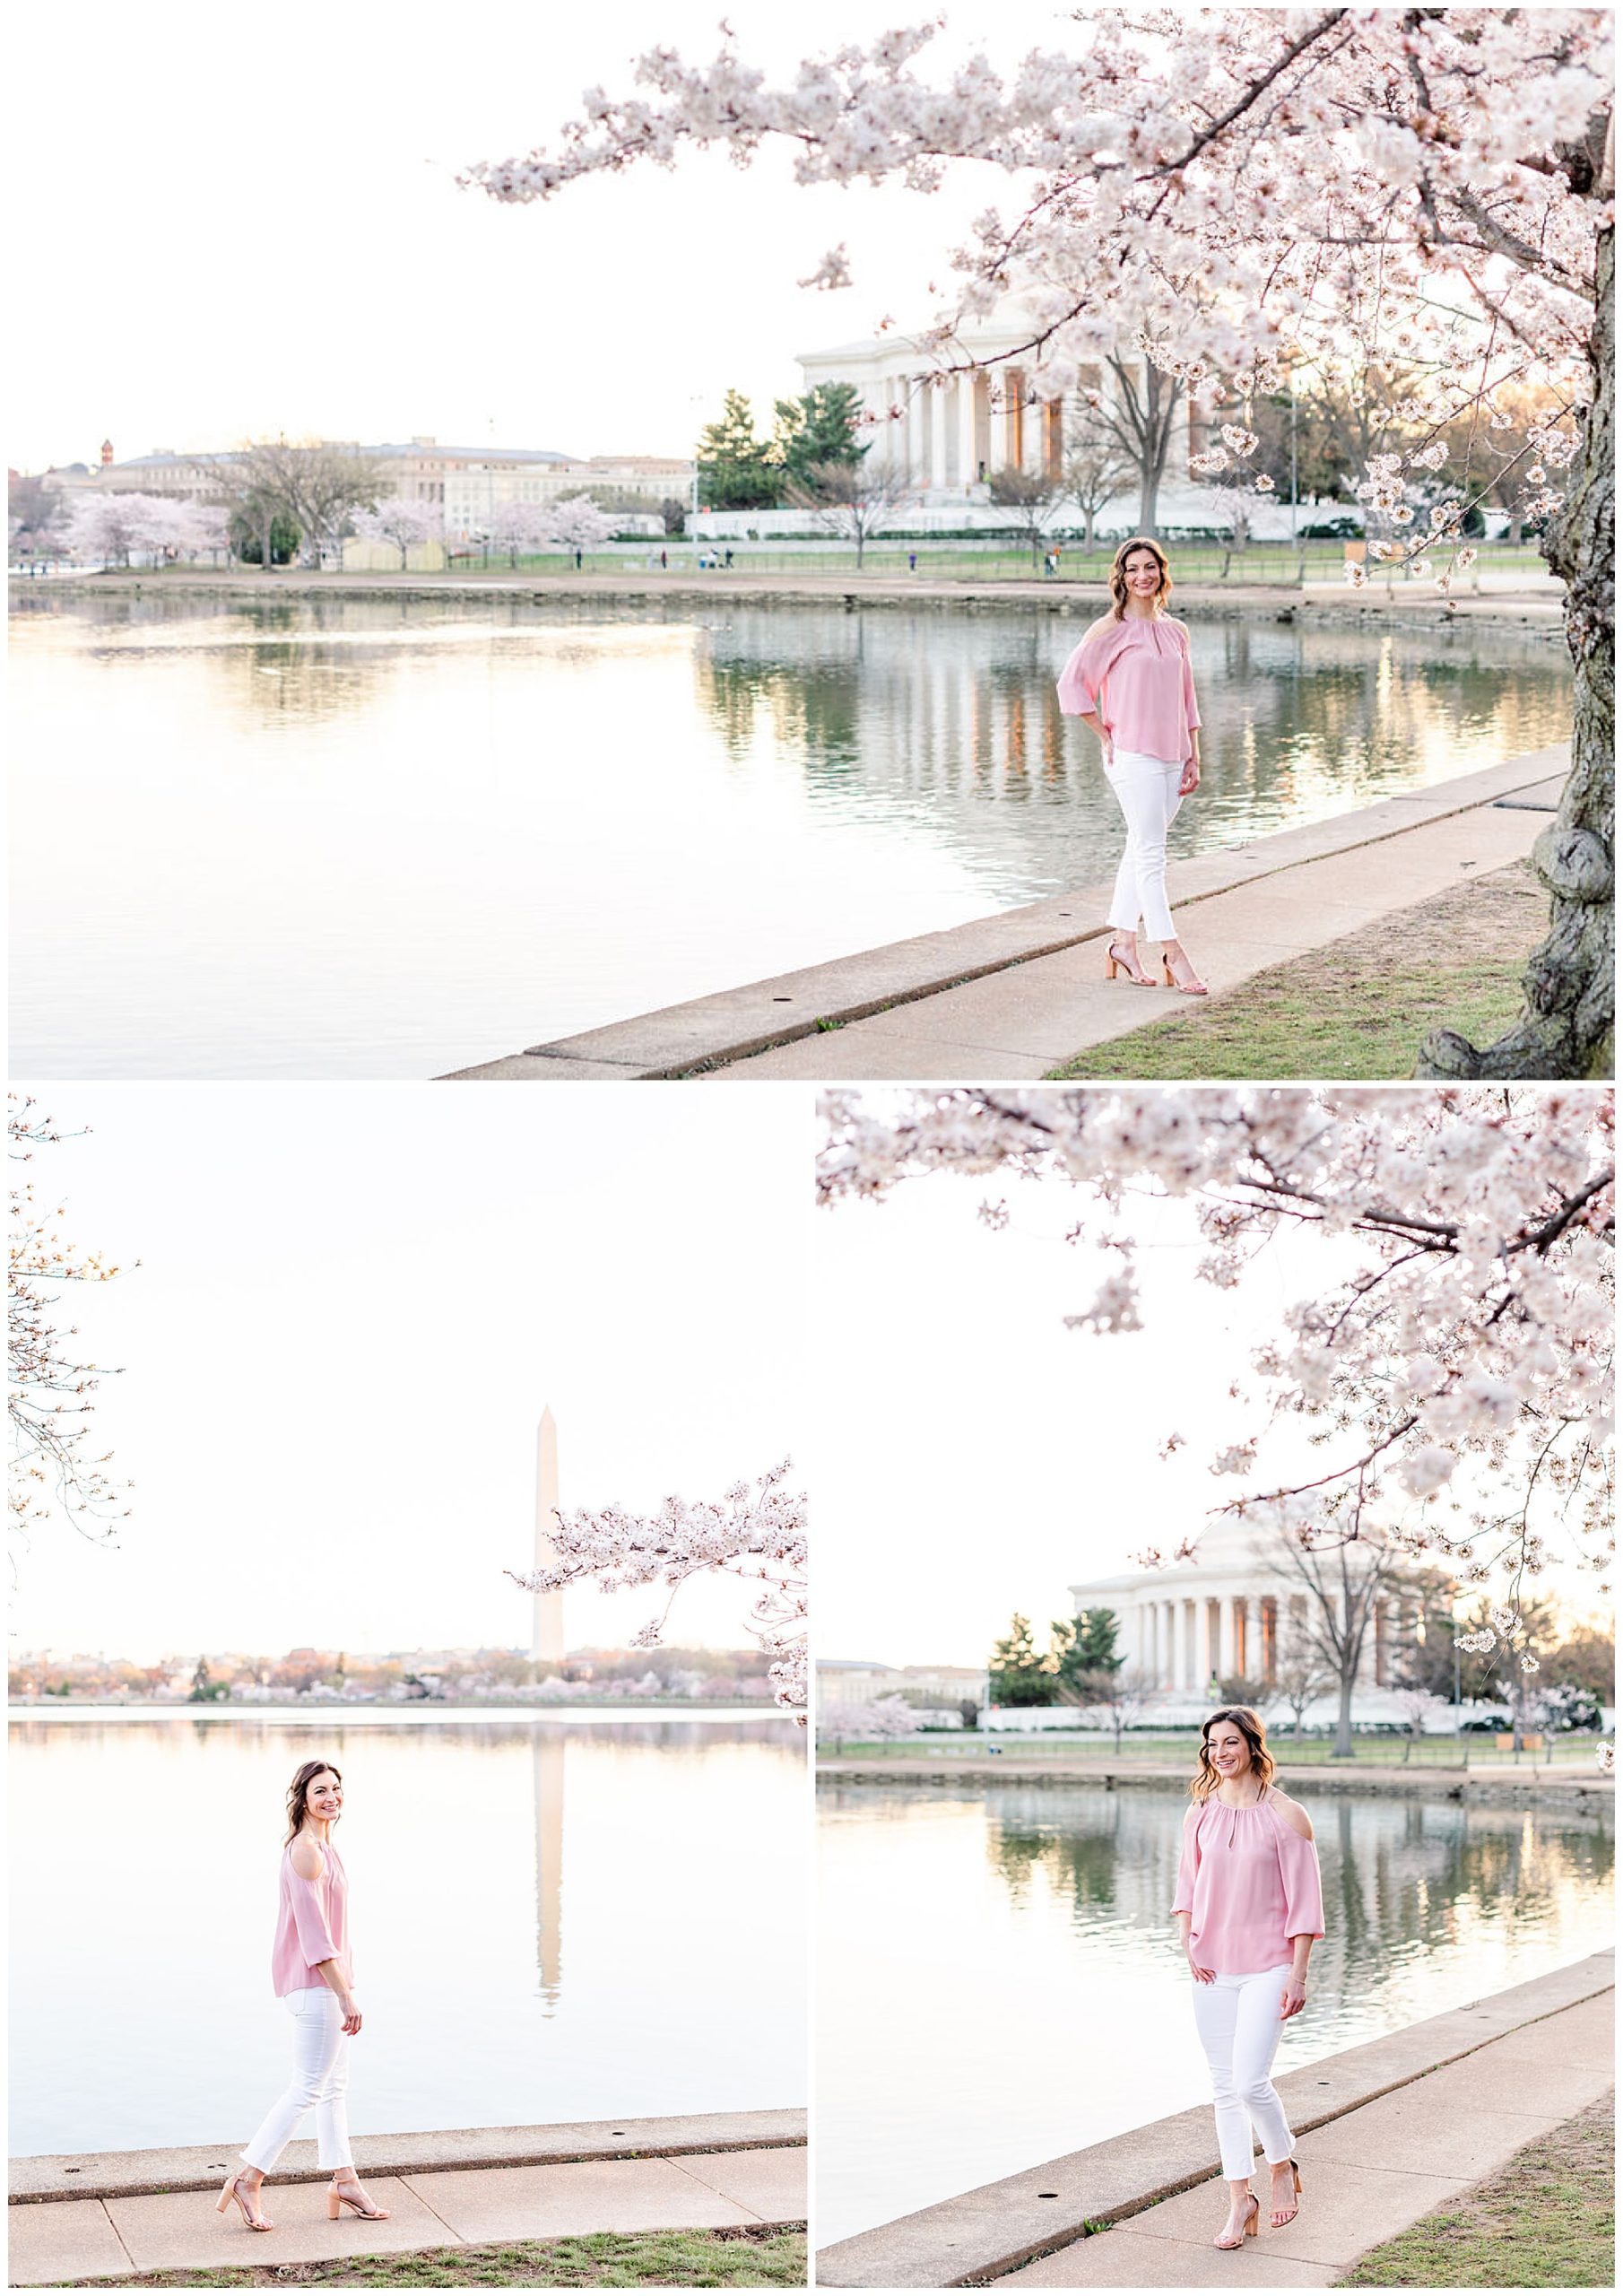 D.C. cherry blossoms headshots, cherry blossoms brand photos, DC peak bloom cherry blossoms, DC cherry blossoms photography, DC cherry blossoms photographer, DC cherry blossoms season, Rachel E.H. Photography, female headshots, pink blouse, woman walking away from camera, Jefferson memorial, woman with hands on hip